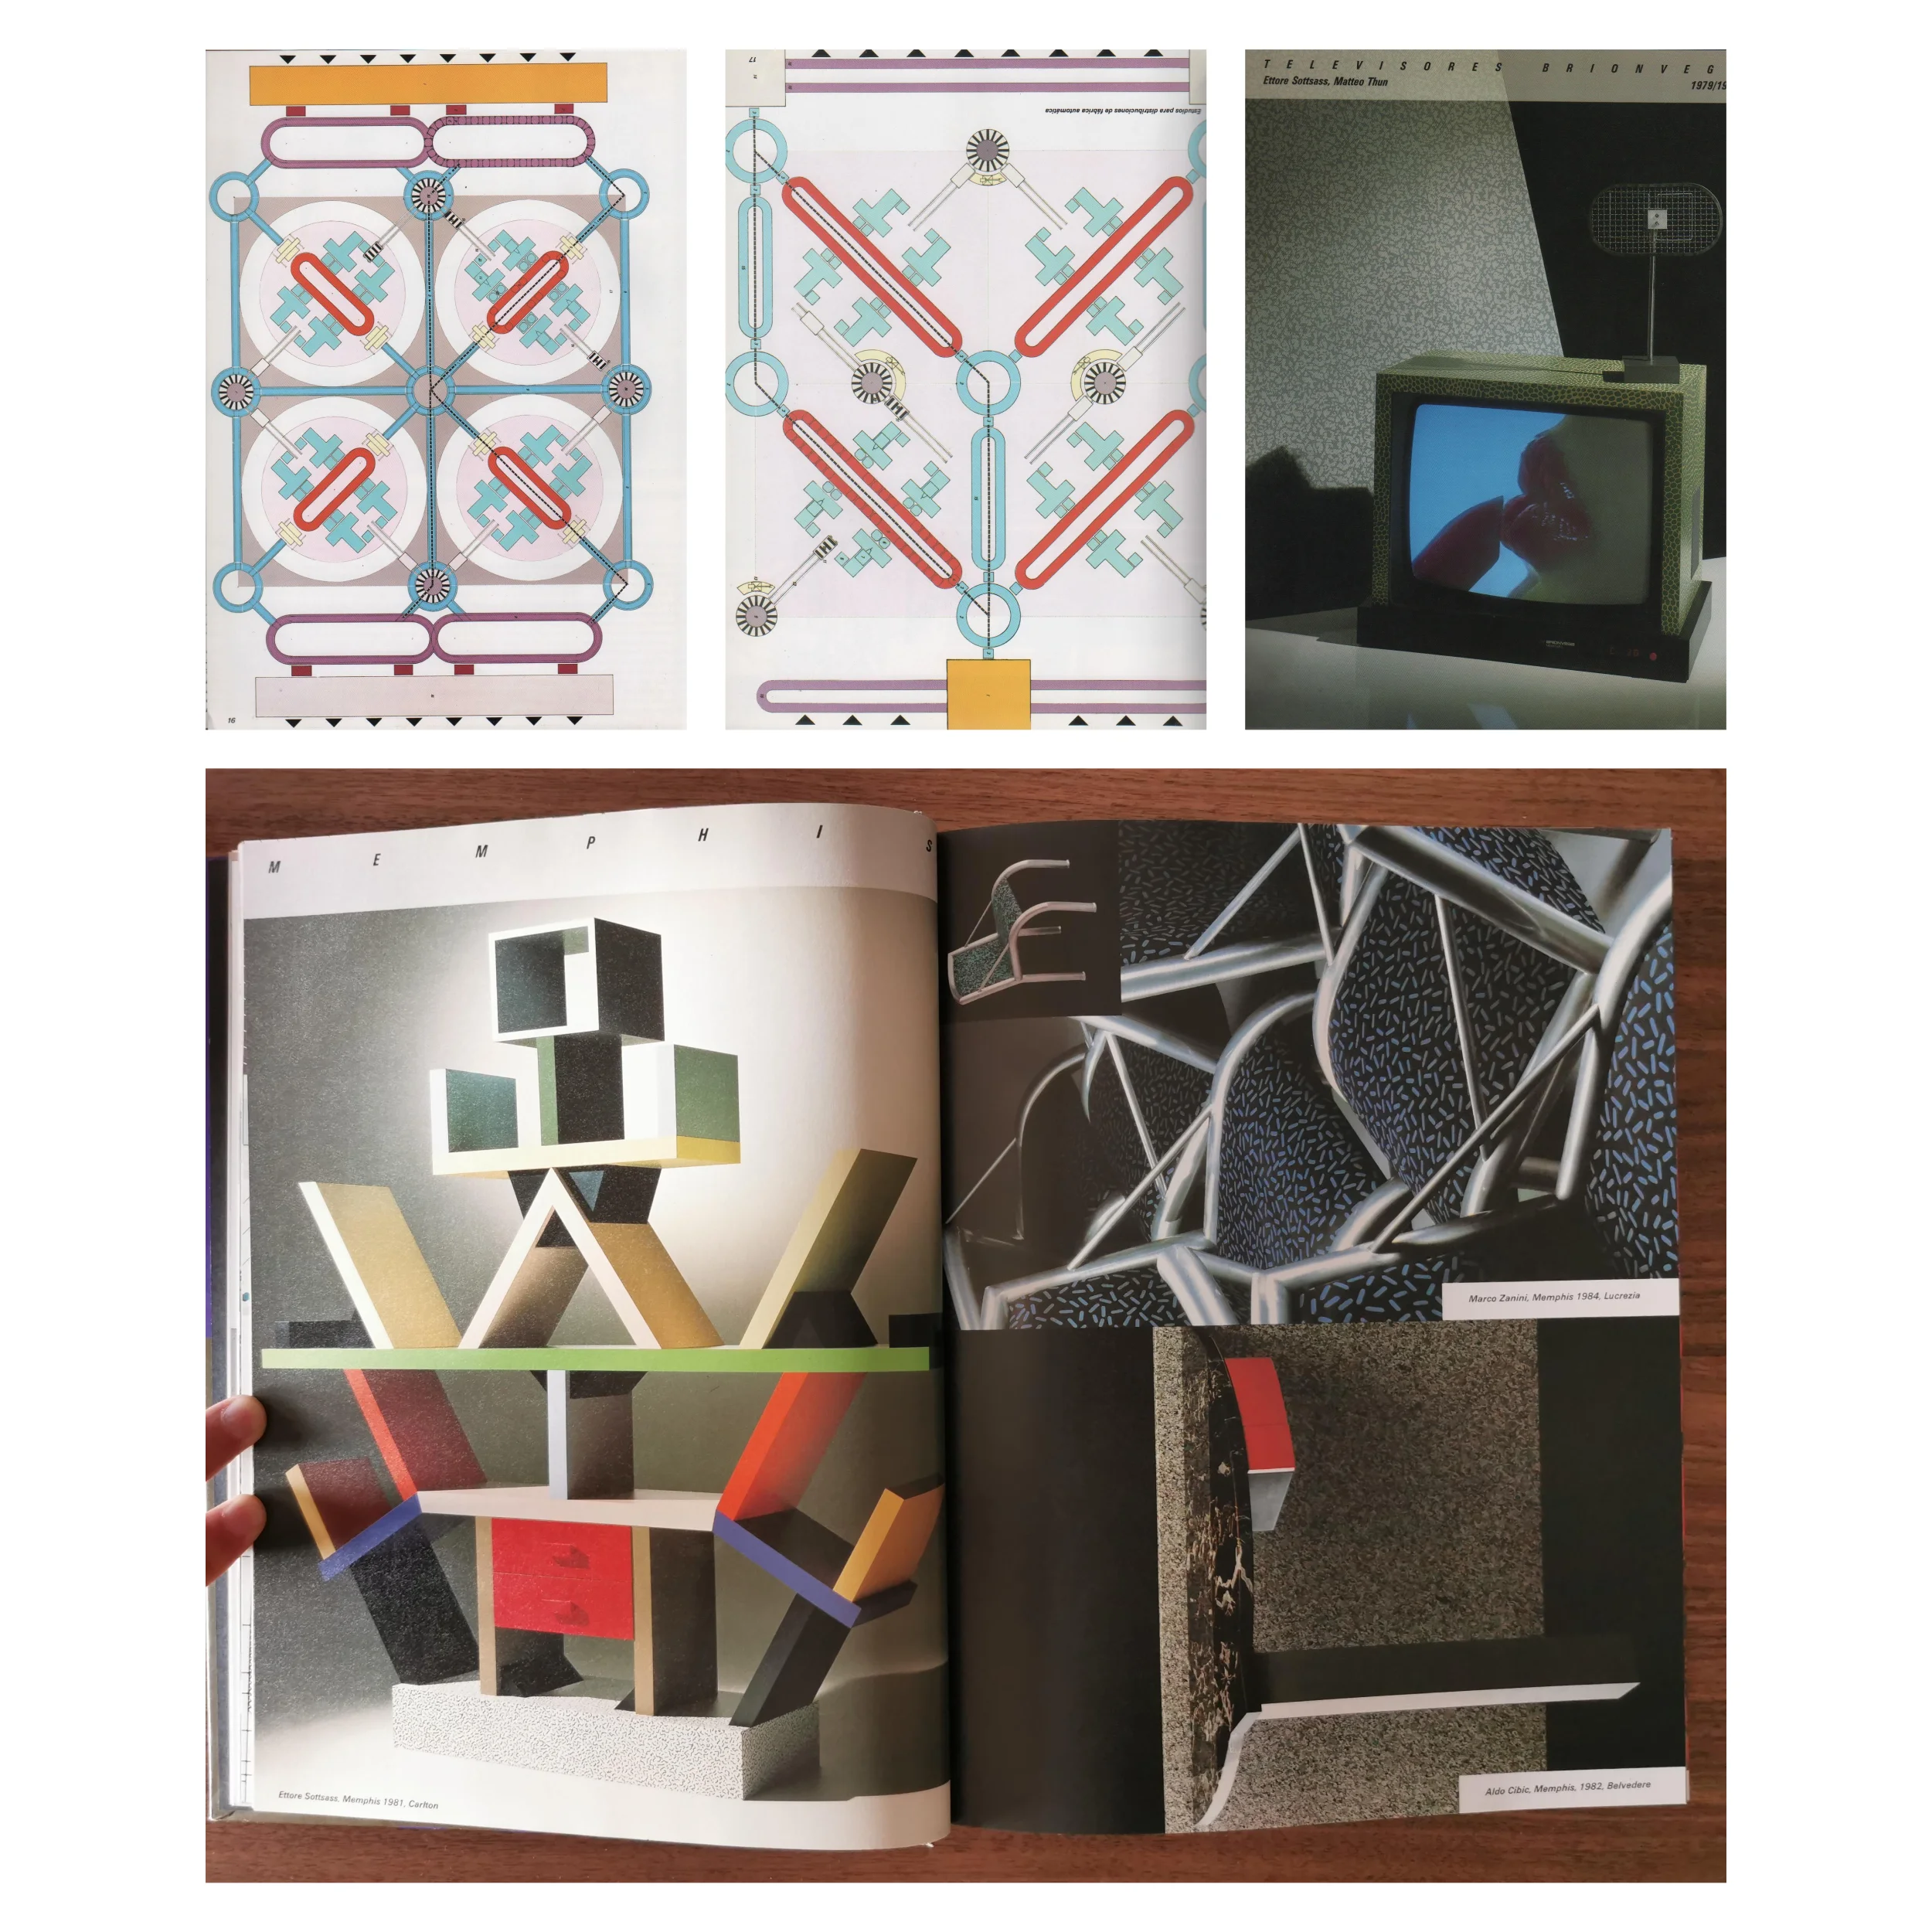 Scans from a book about Ettore Sottsass with pictures of drawings, a television, and some furniture.